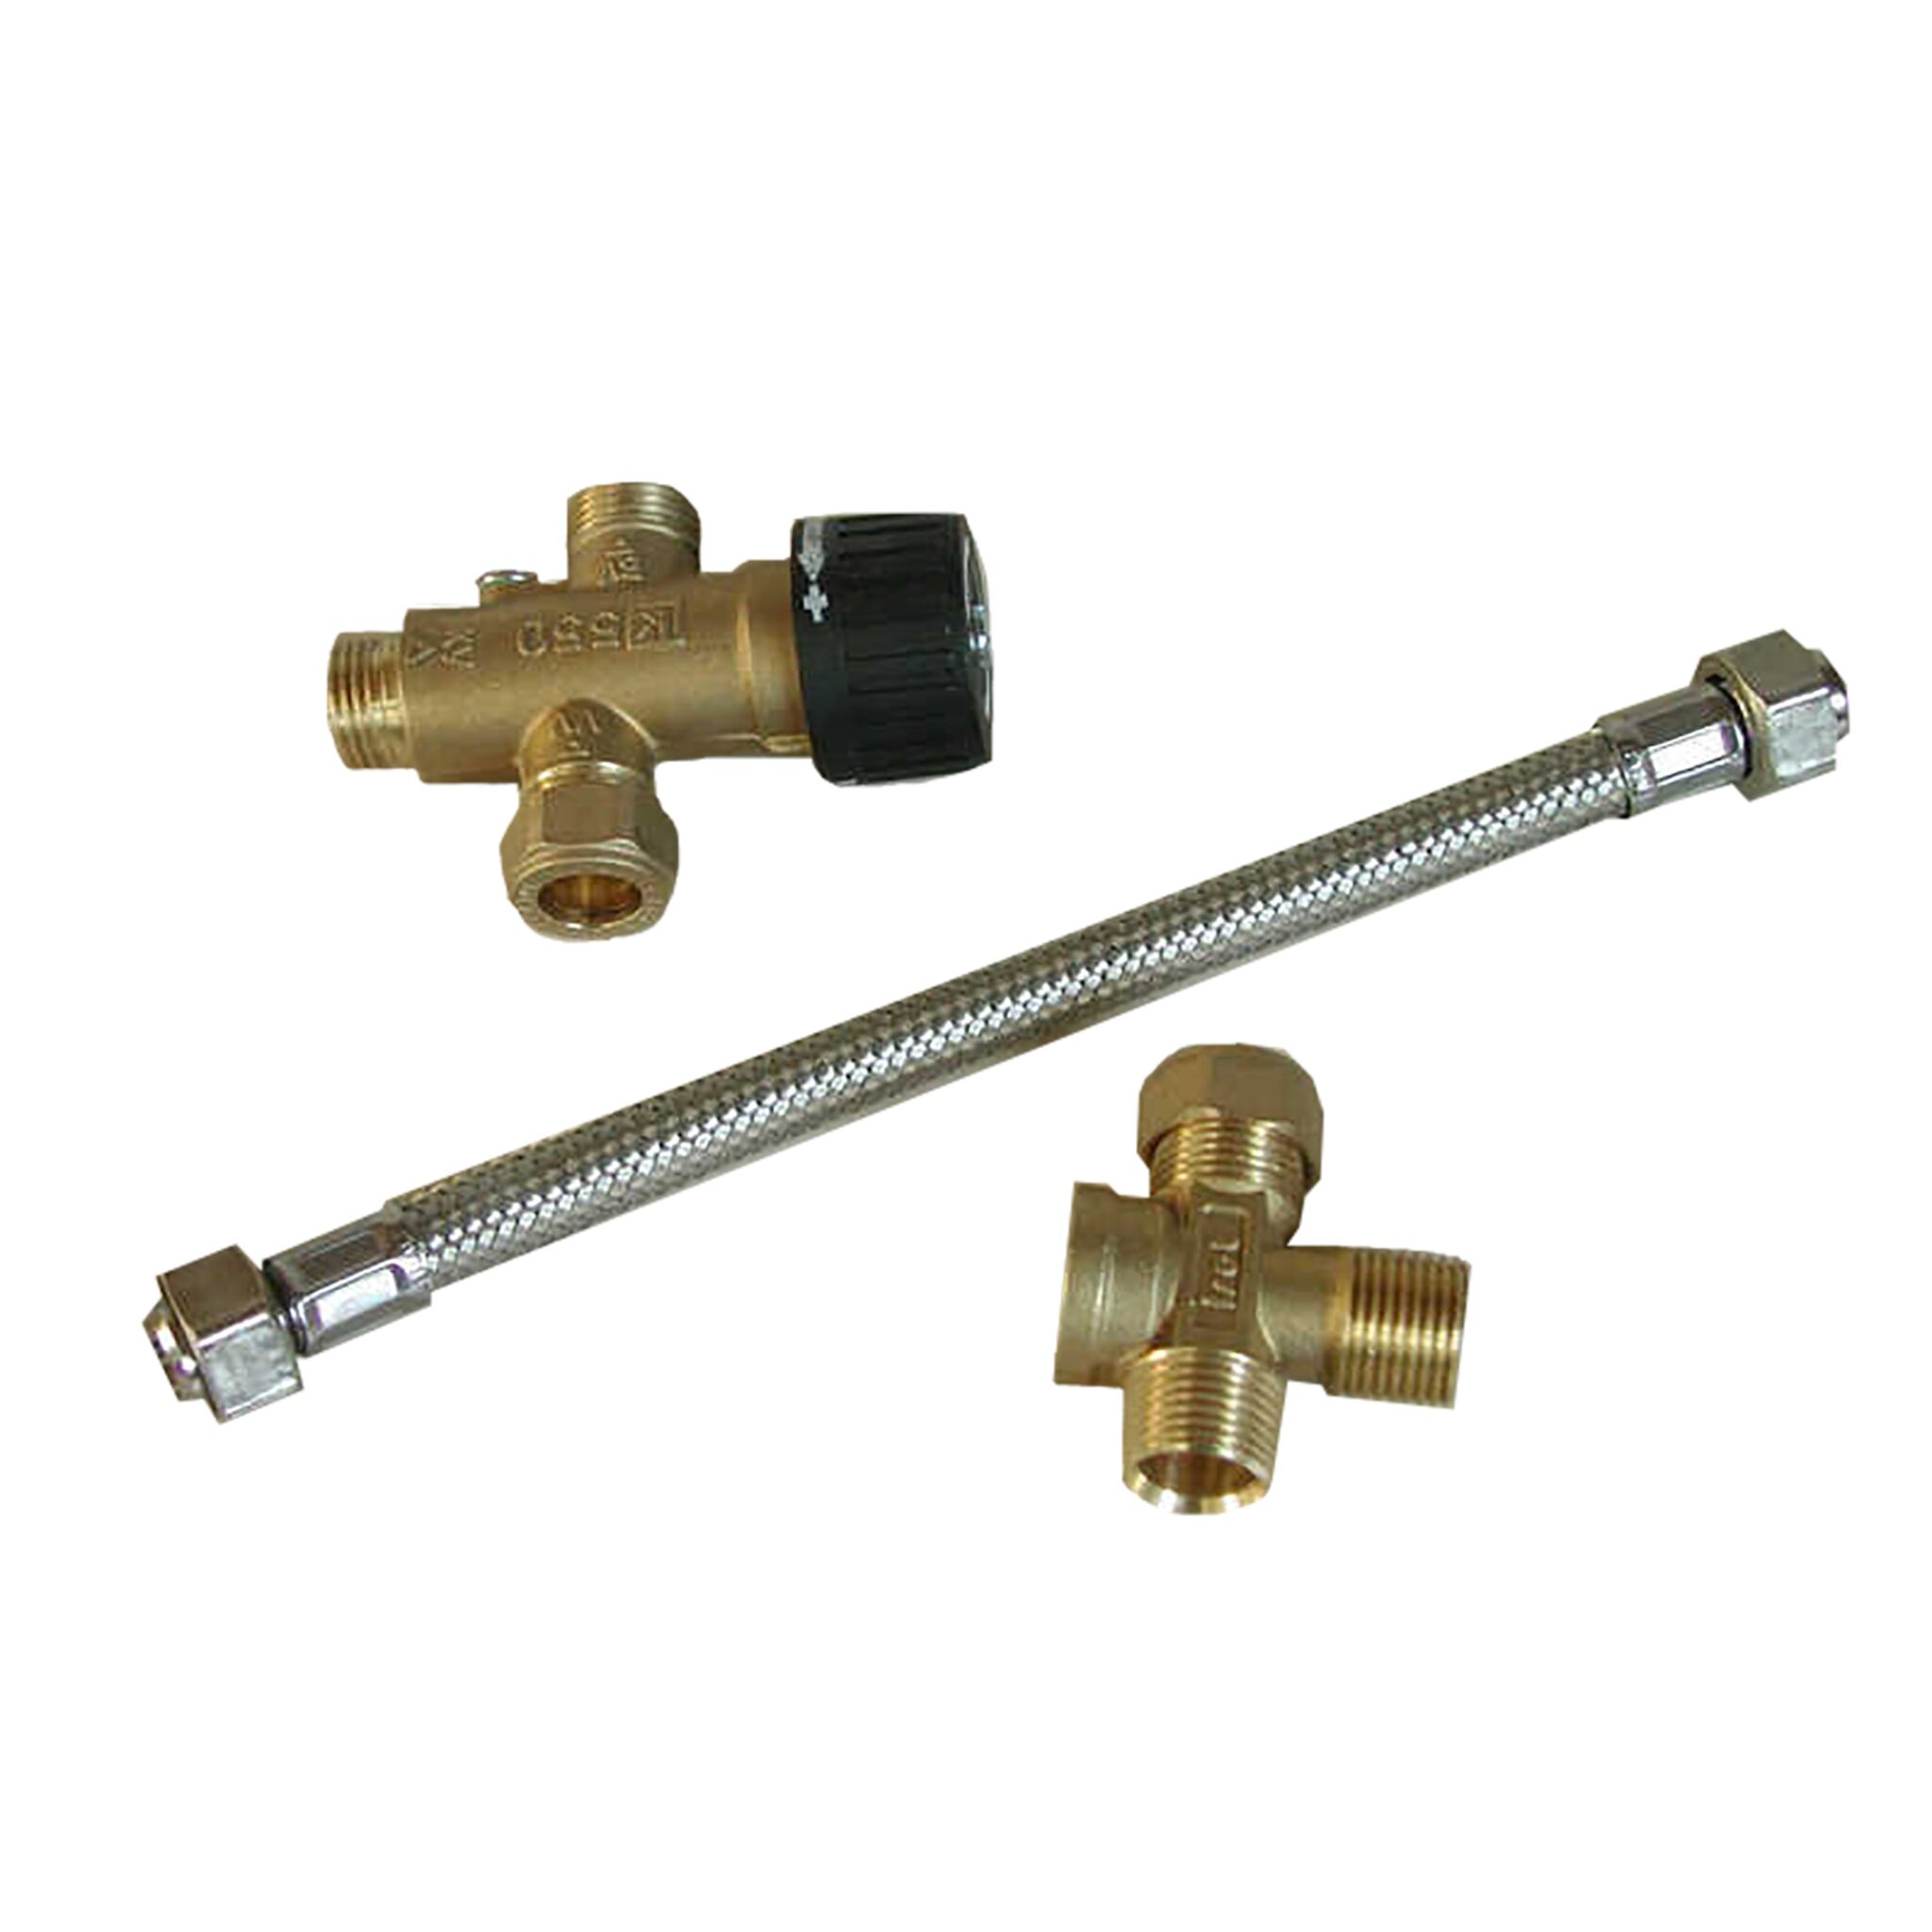 Isotherm mixing valve for water heater Basic